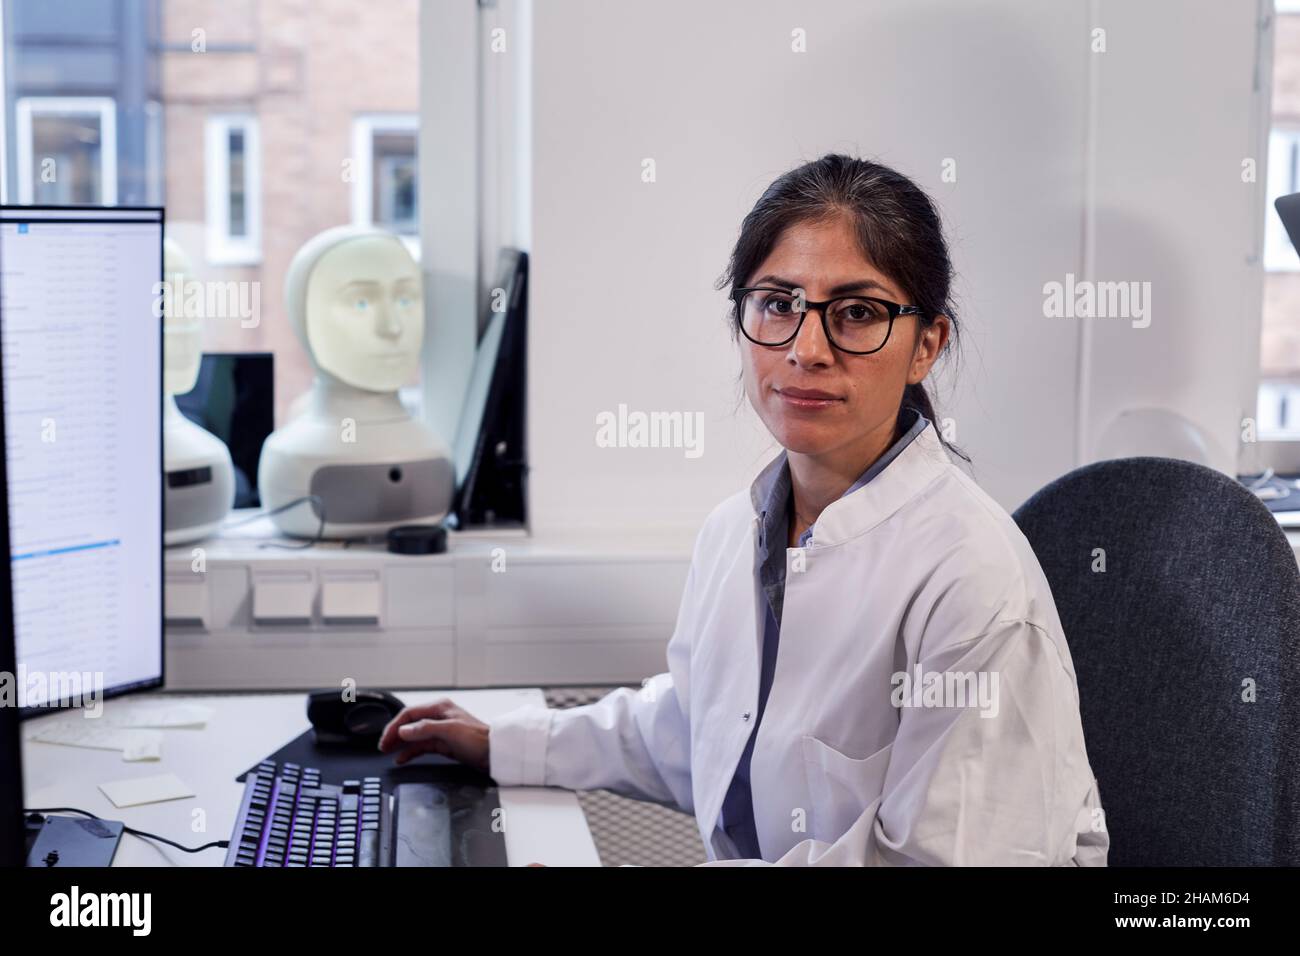 Portrait of female engineer at work station Stock Photo